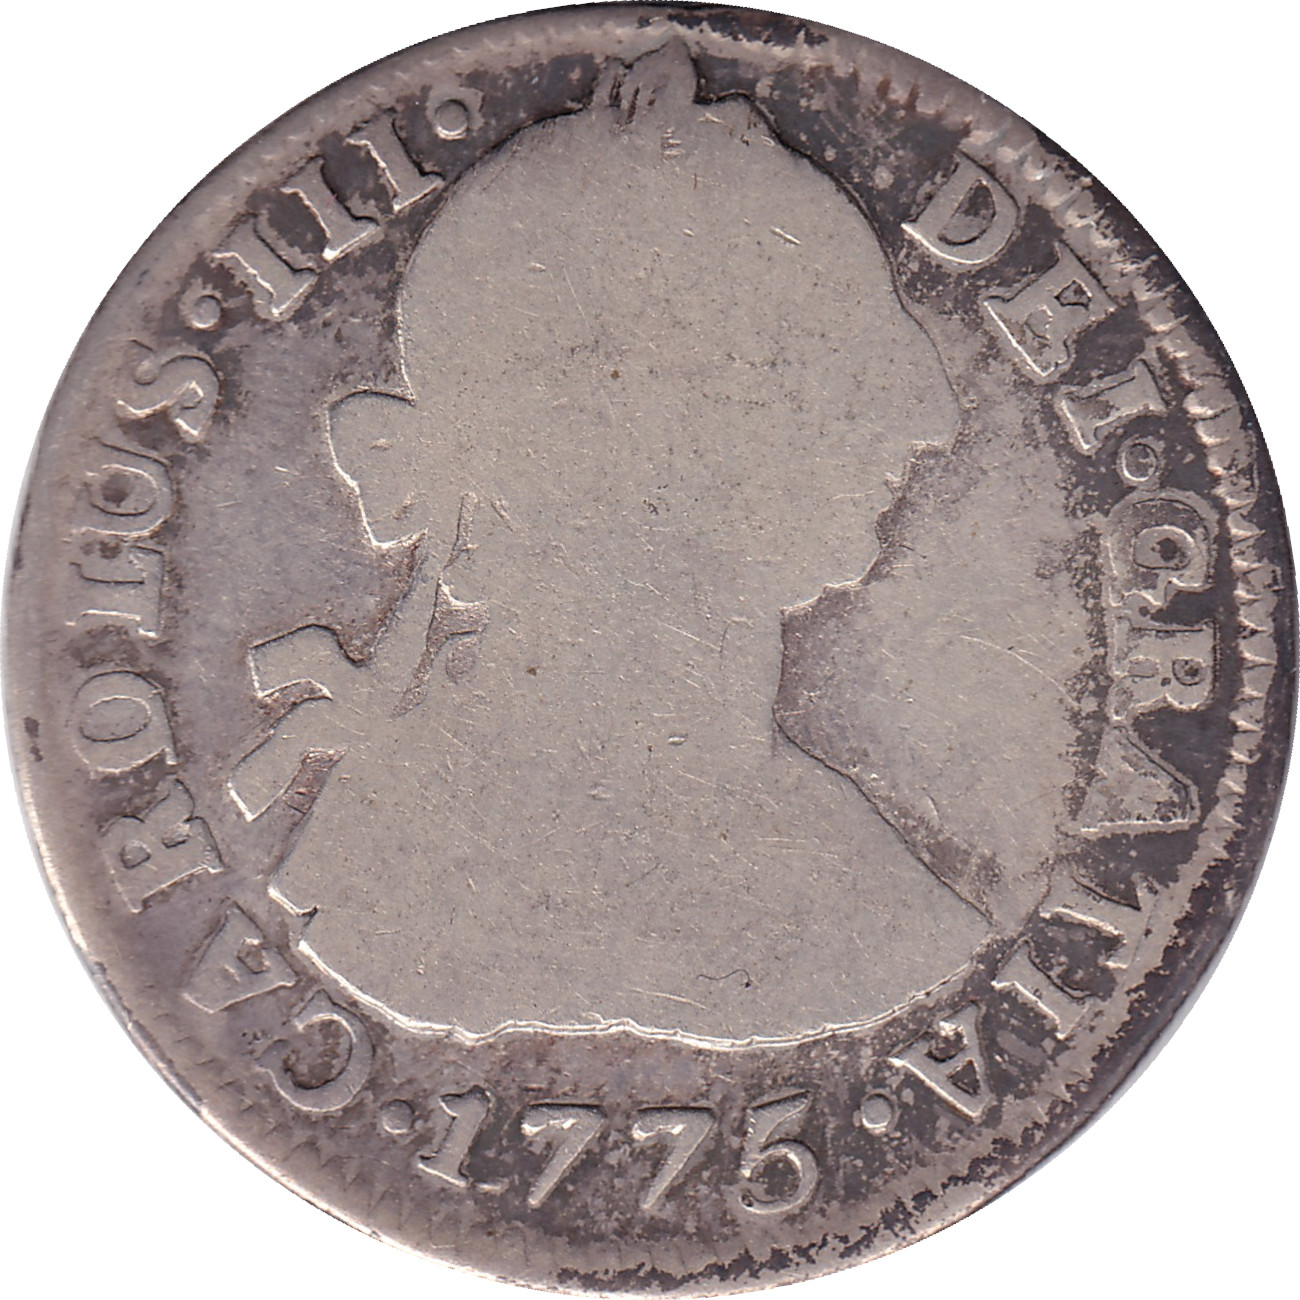 2 reales - Charles III - Young bust